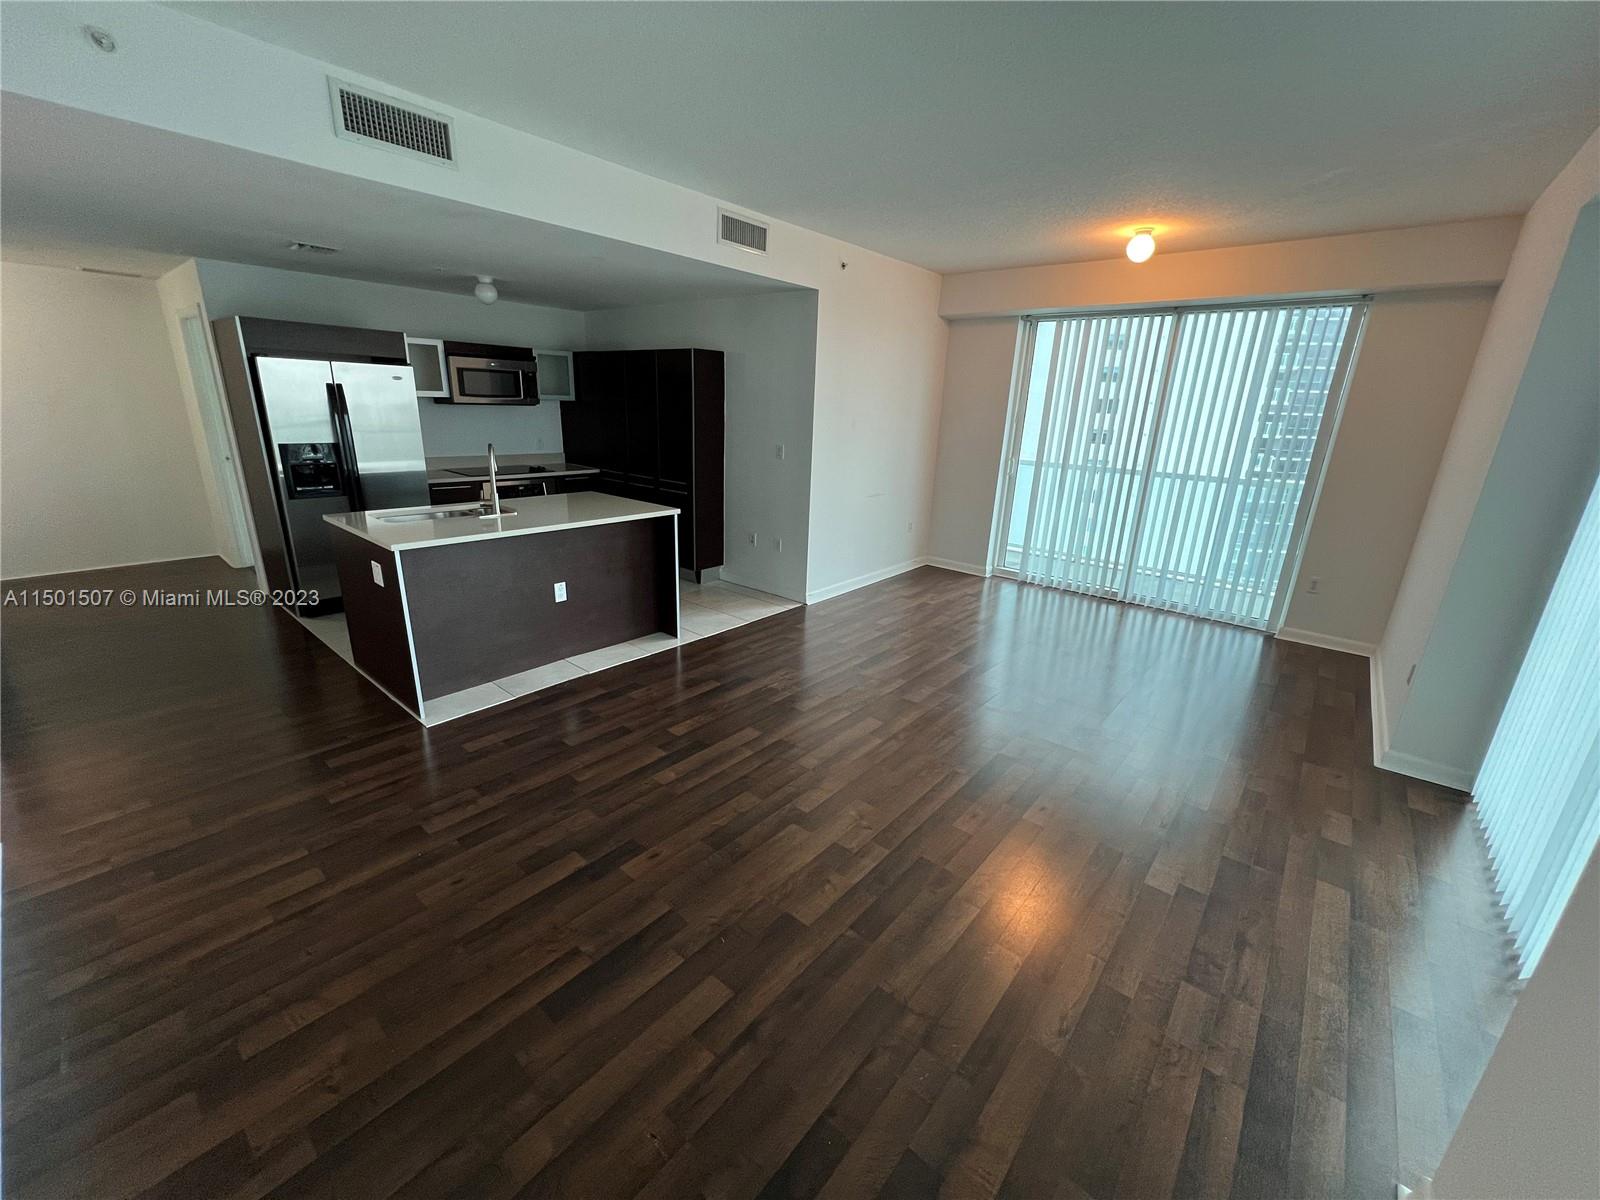 Spacious corner unit facing west over the west pool with great sunsets. Building offers many amenities and location is fantastic. Walking distance to supermarkets, shops, and restaurants and Margaret Pace Park.